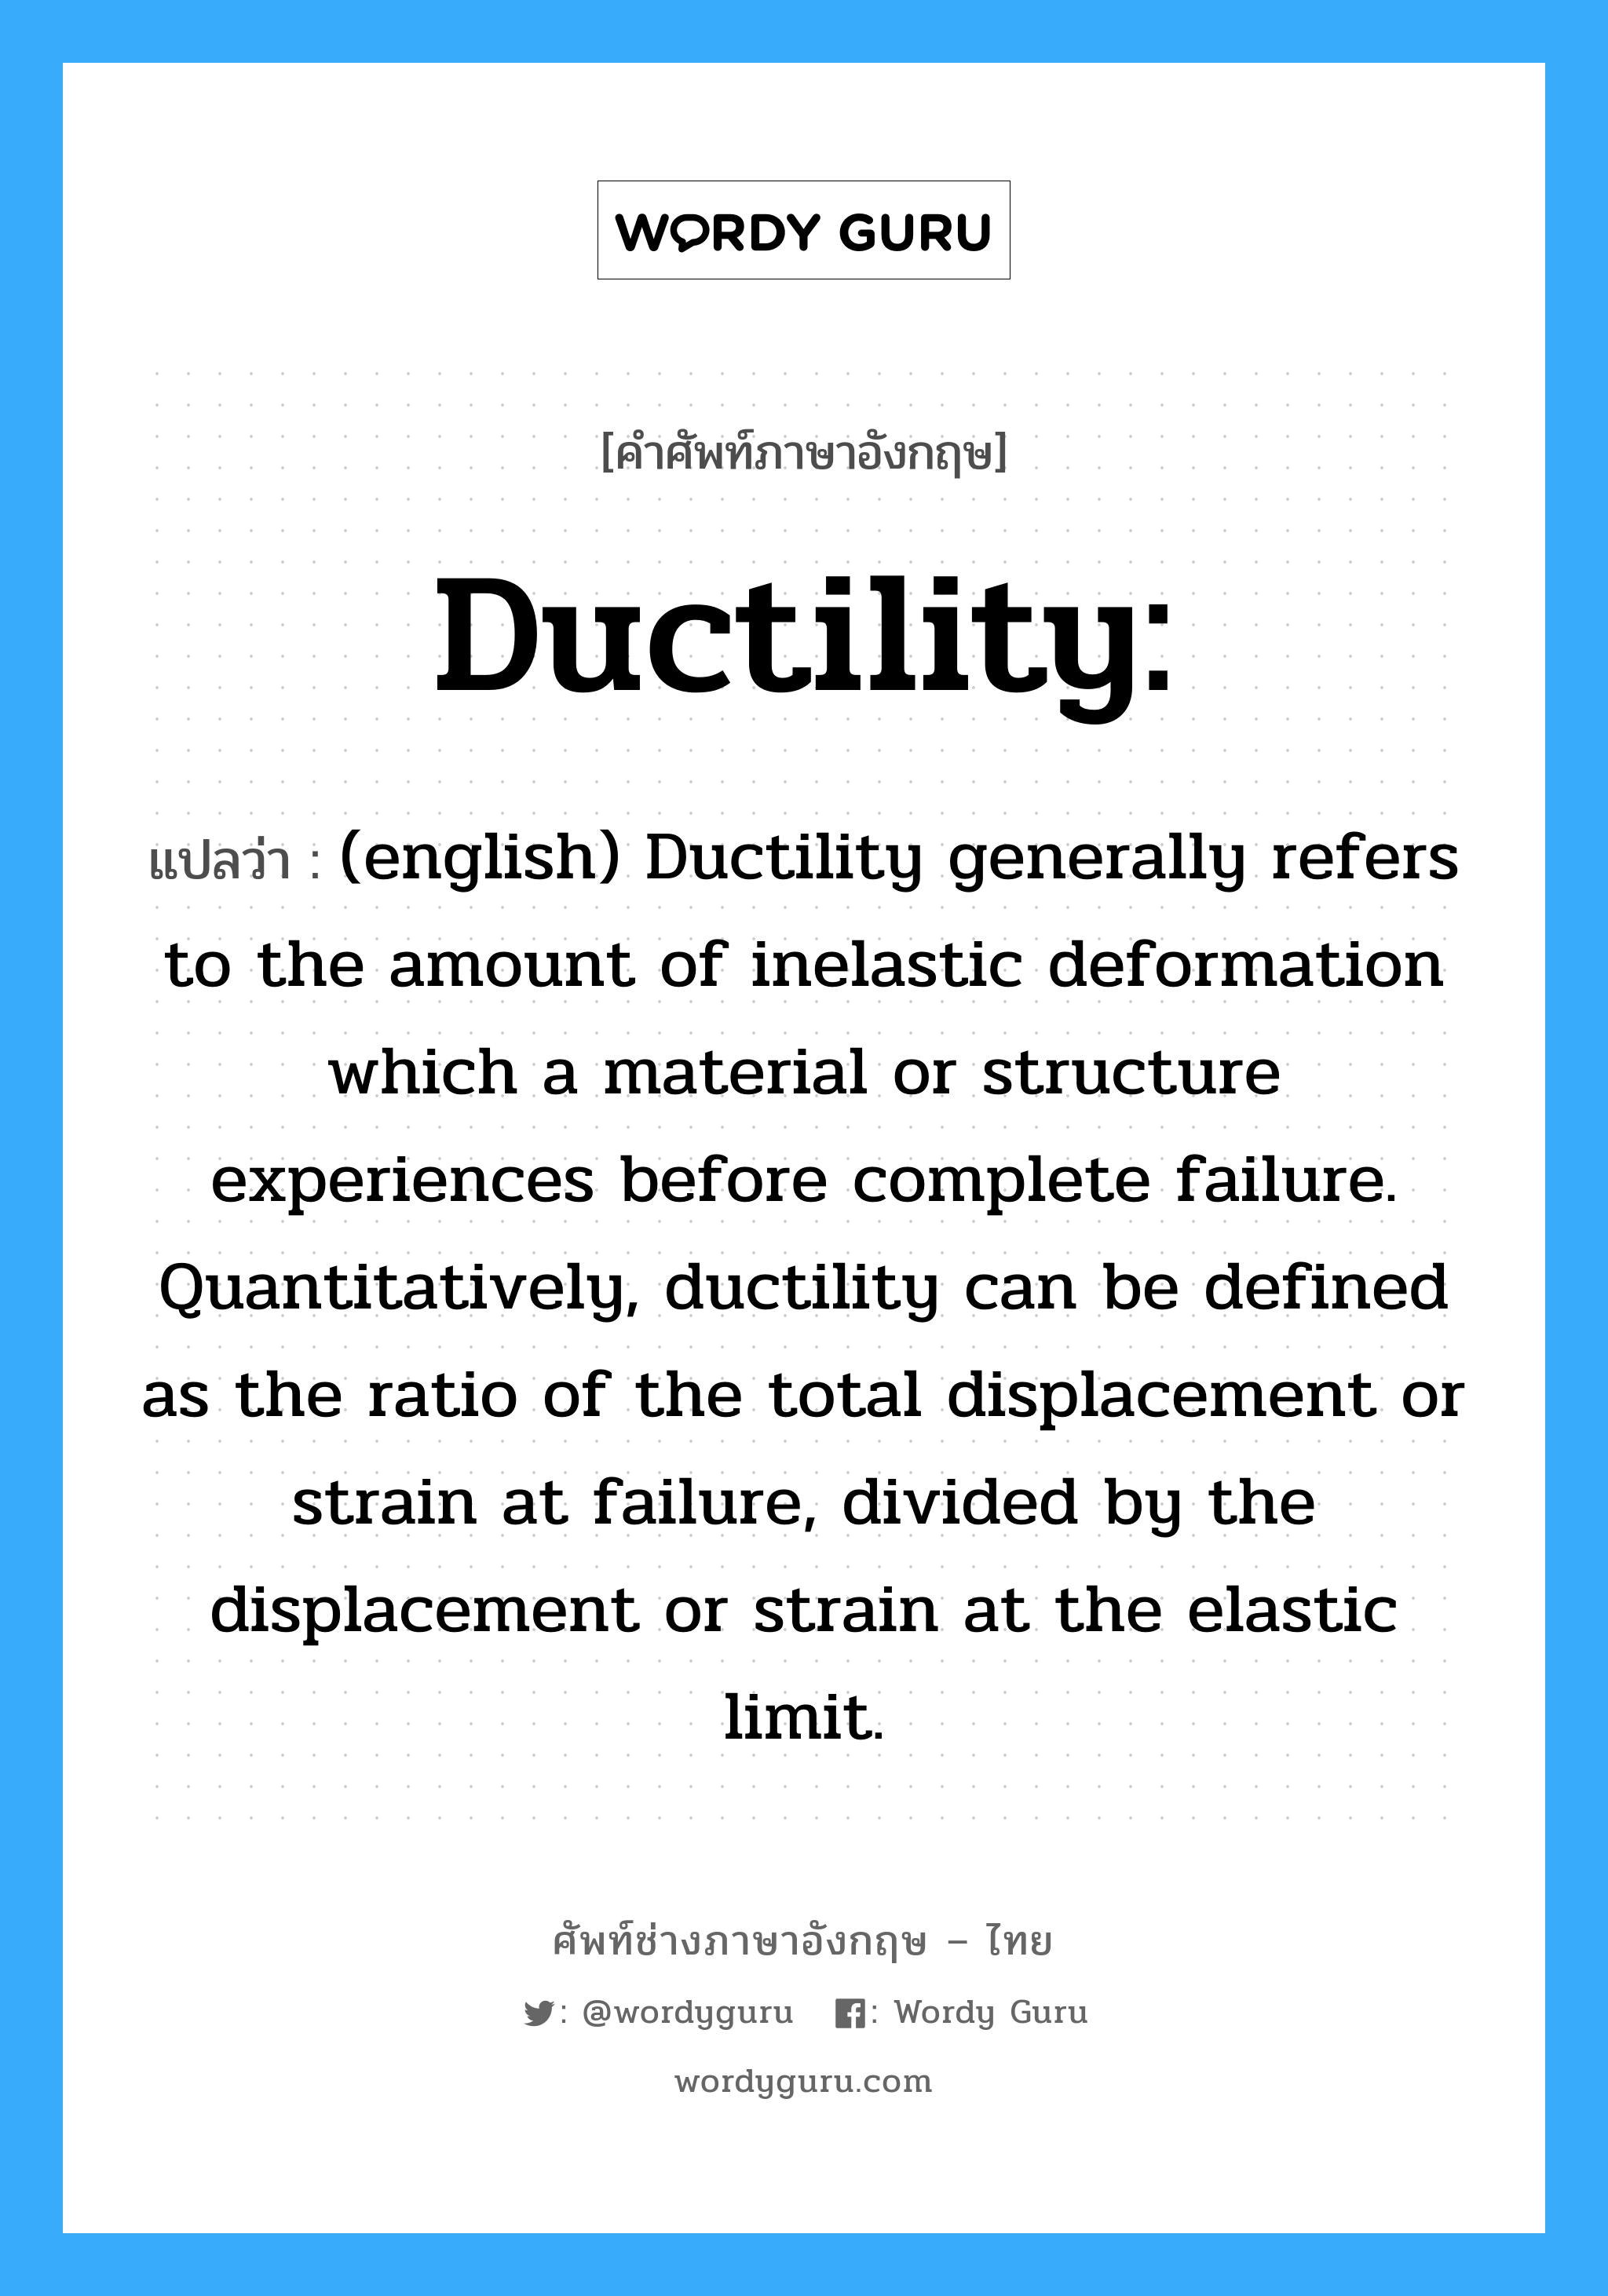 (english) Ductility generally refers to the amount of inelastic deformation which a material or structure experiences before complete failure. Quantitatively, ductility can be defined as the ratio of the total displacement or strain at failure, divided by the displacement or strain at the elastic limit. ภาษาอังกฤษ?, คำศัพท์ช่างภาษาอังกฤษ - ไทย (english) Ductility generally refers to the amount of inelastic deformation which a material or structure experiences before complete failure. Quantitatively, ductility can be defined as the ratio of the total displacement or strain at failure, divided by the displacement or strain at the elastic limit. คำศัพท์ภาษาอังกฤษ (english) Ductility generally refers to the amount of inelastic deformation which a material or structure experiences before complete failure. Quantitatively, ductility can be defined as the ratio of the total displacement or strain at failure, divided by the displacement or strain at the elastic limit. แปลว่า Ductility: